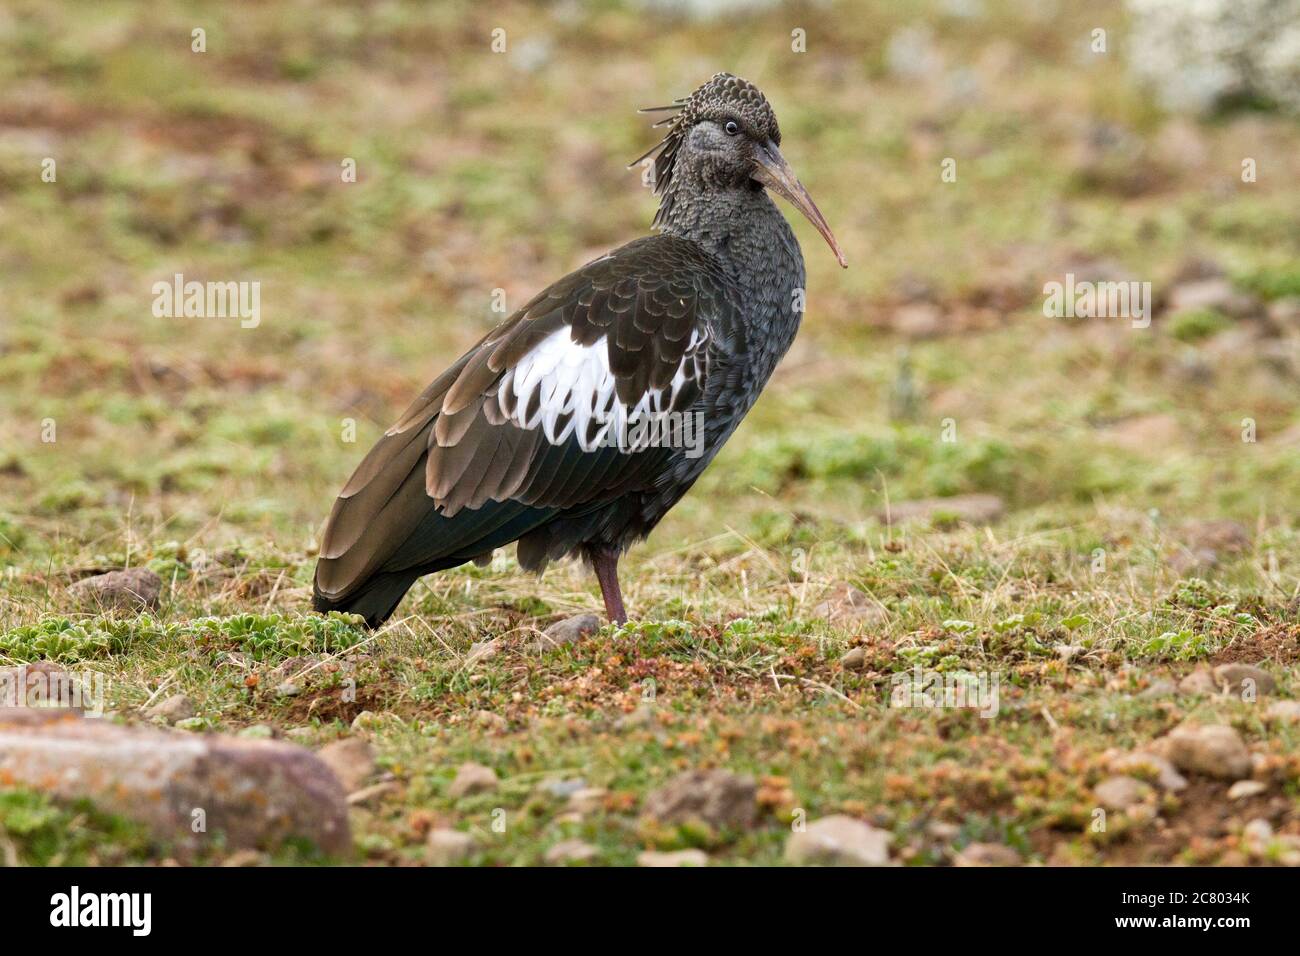 The wattled ibis (Bostrychia carunculata) is a species of bird in the family Threskiornithidae. It is endemic to the Ethiopian highlands and is found Stock Photo